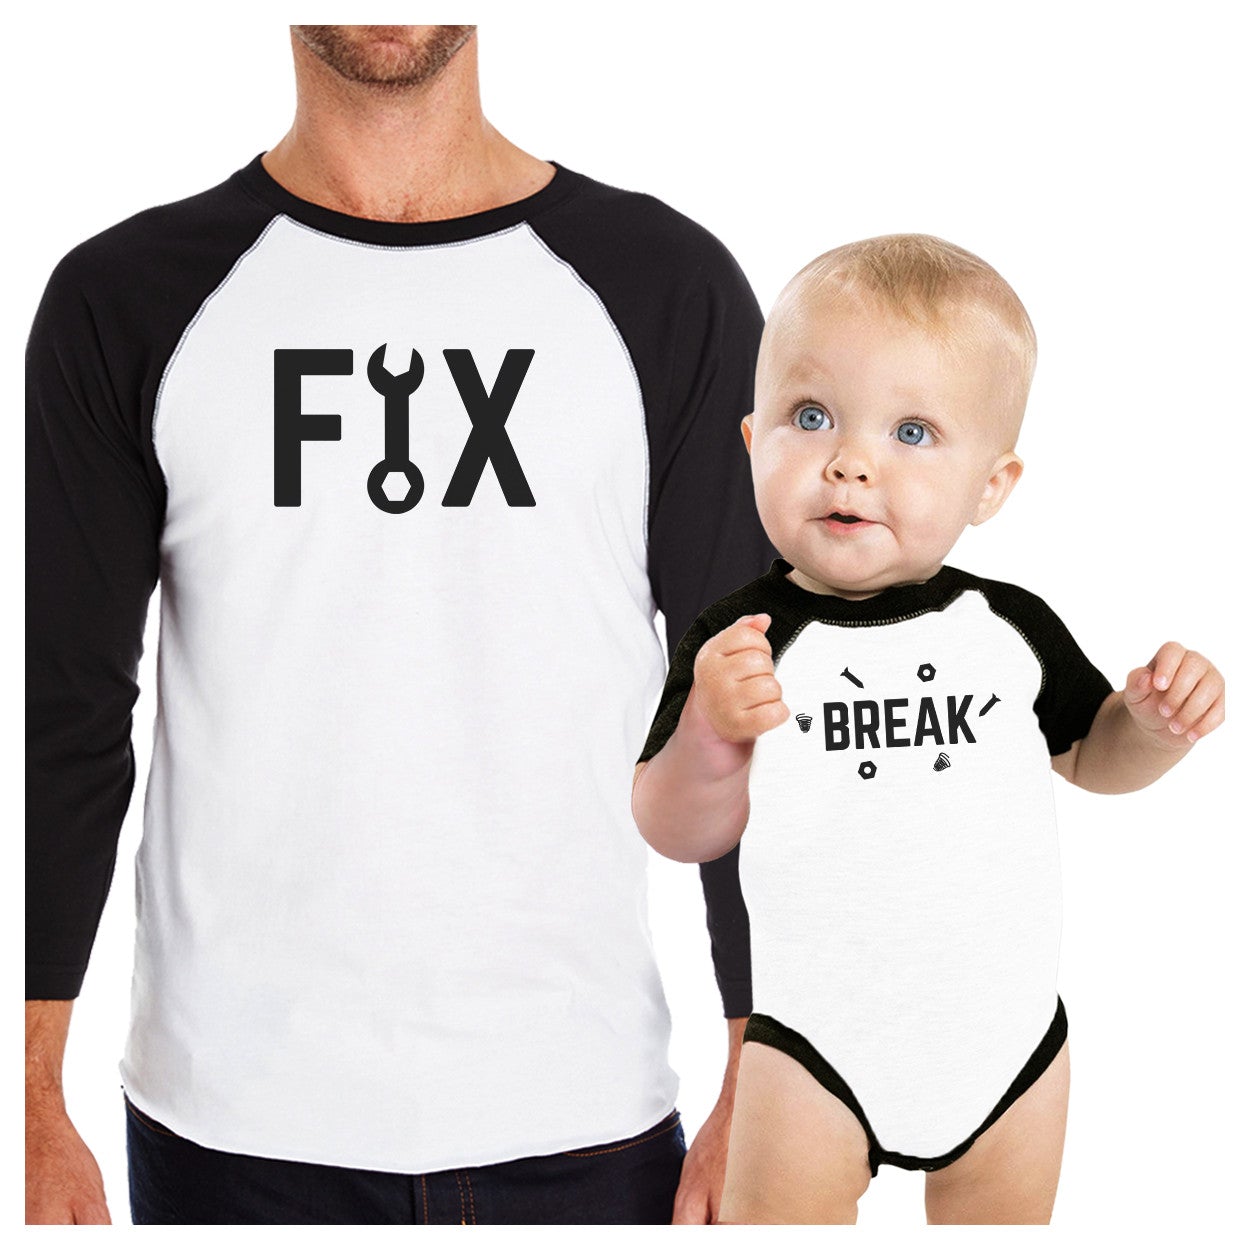 Fix And Break Funny Design Graphic T-Shirt Dad Son Matching Tops - 365 In Love